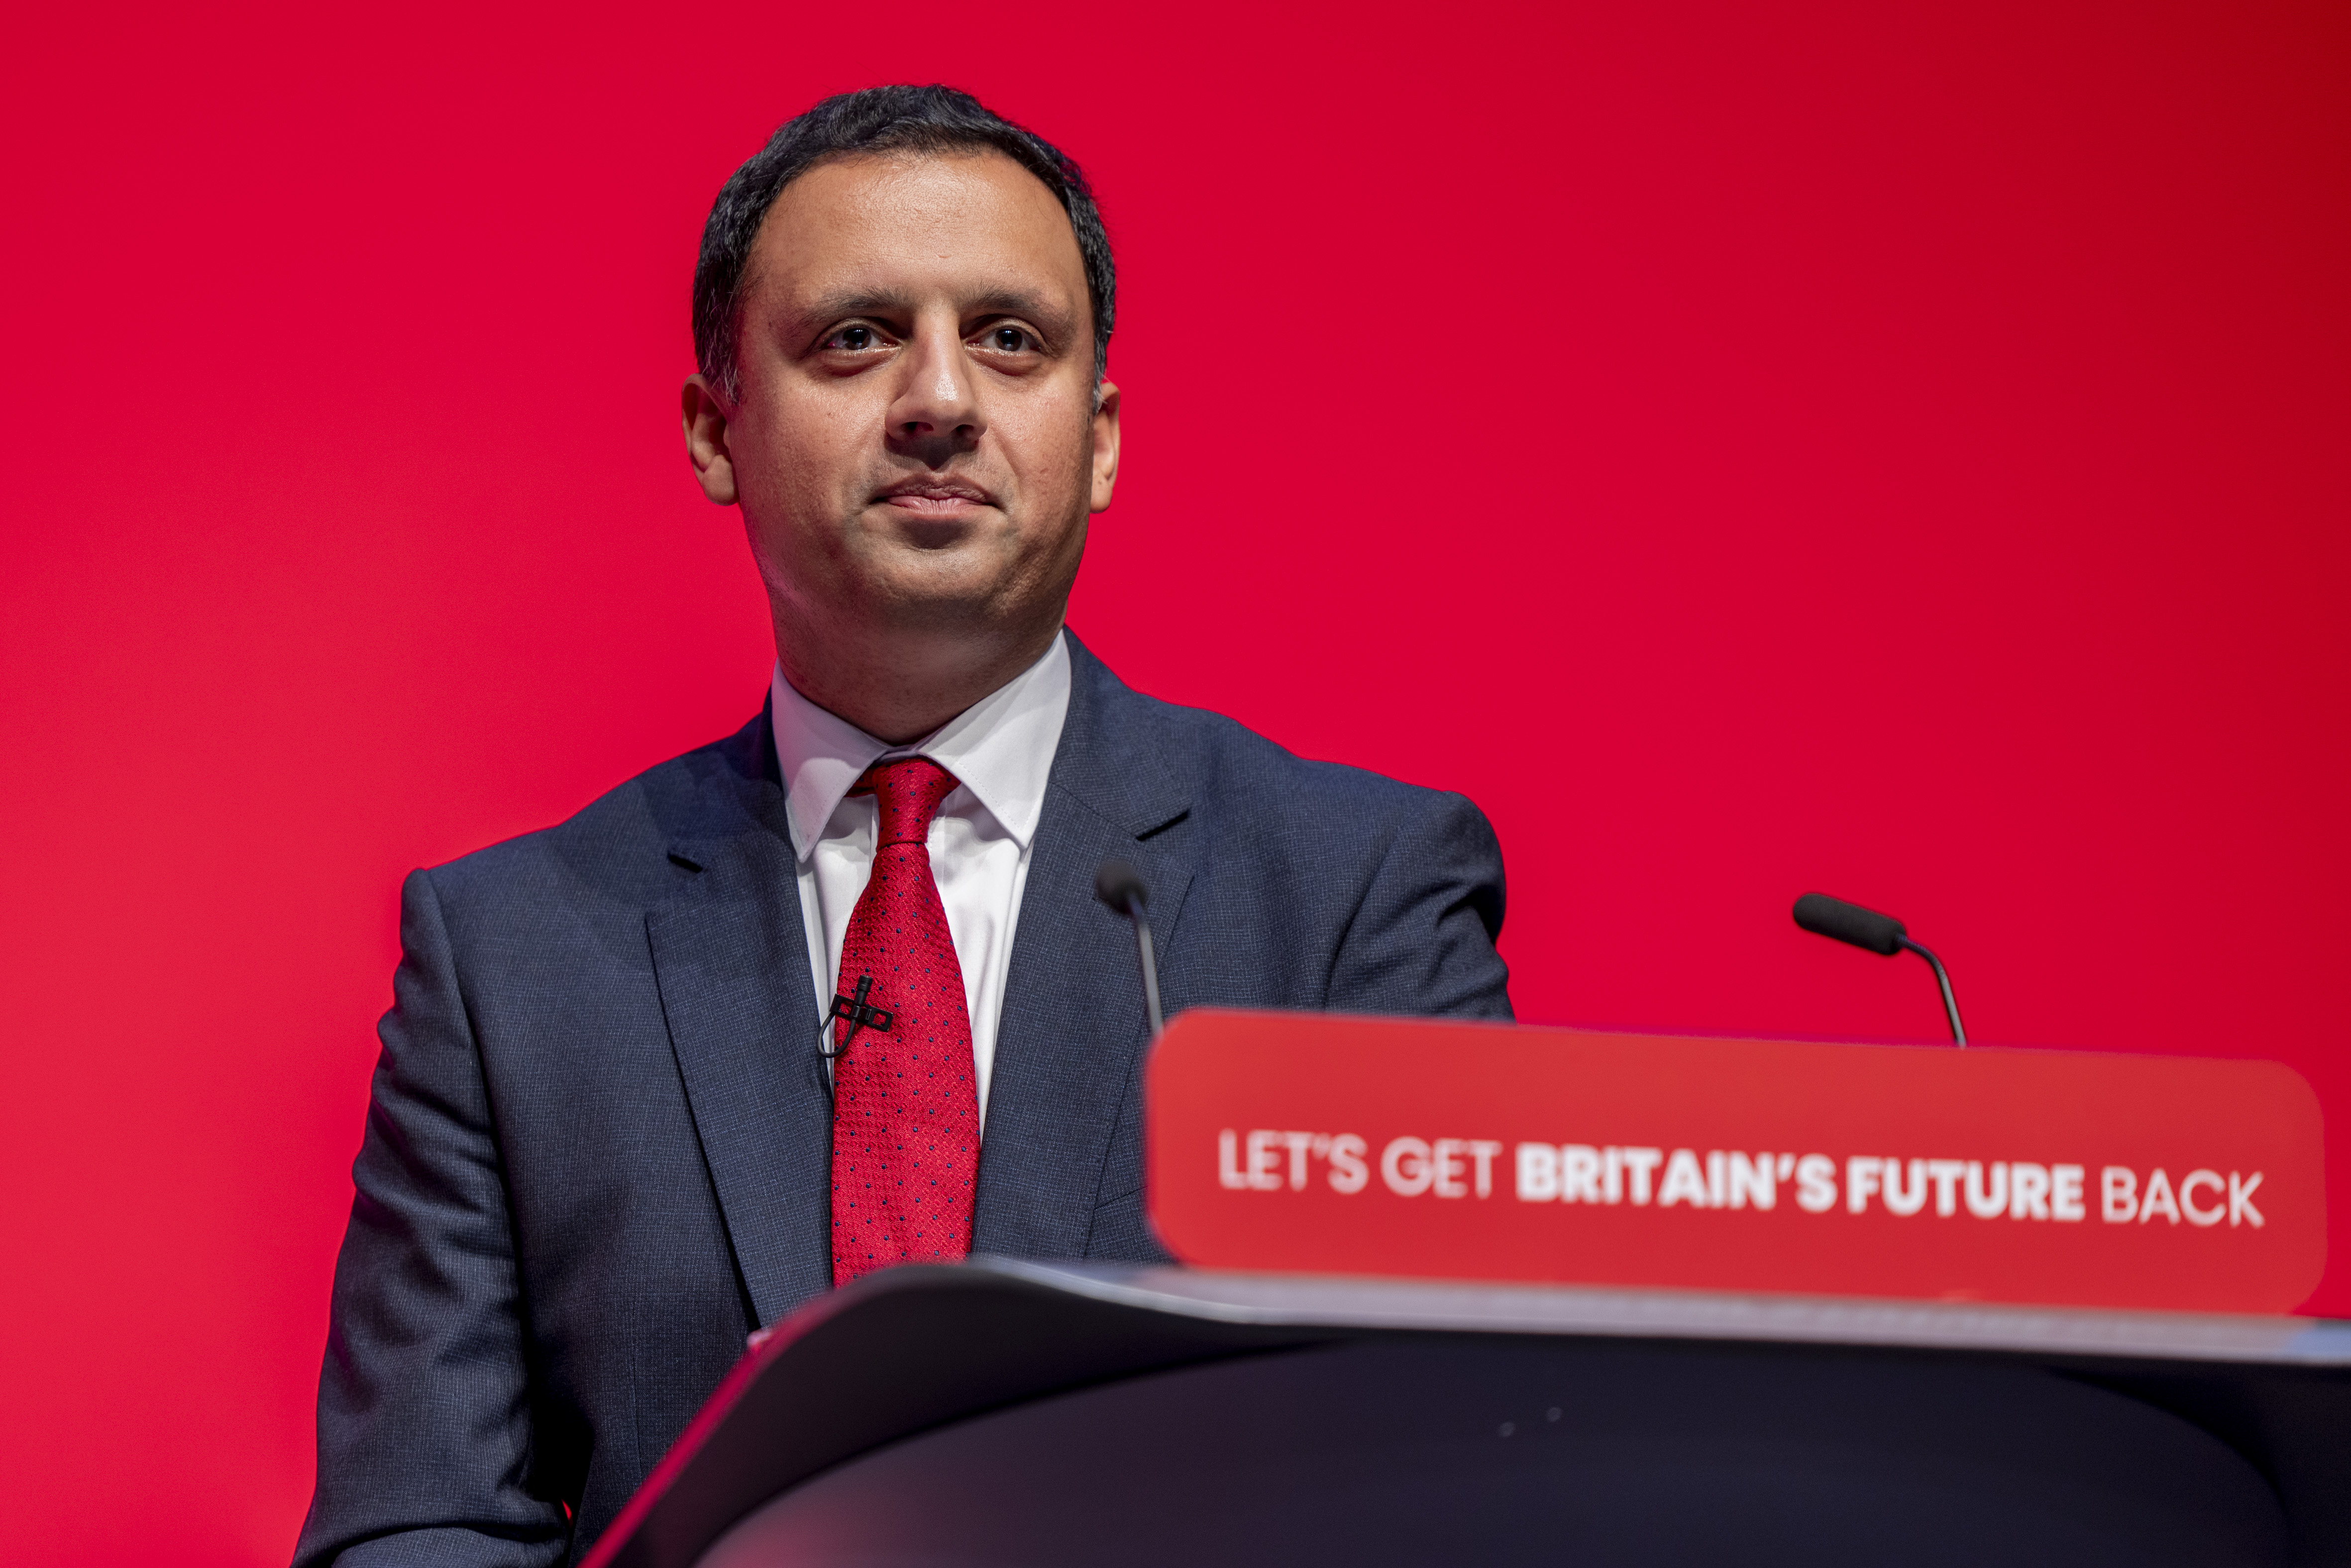 Scottish Labour leader Anas Sarwar said the Scottish Government had an issue with the truth.